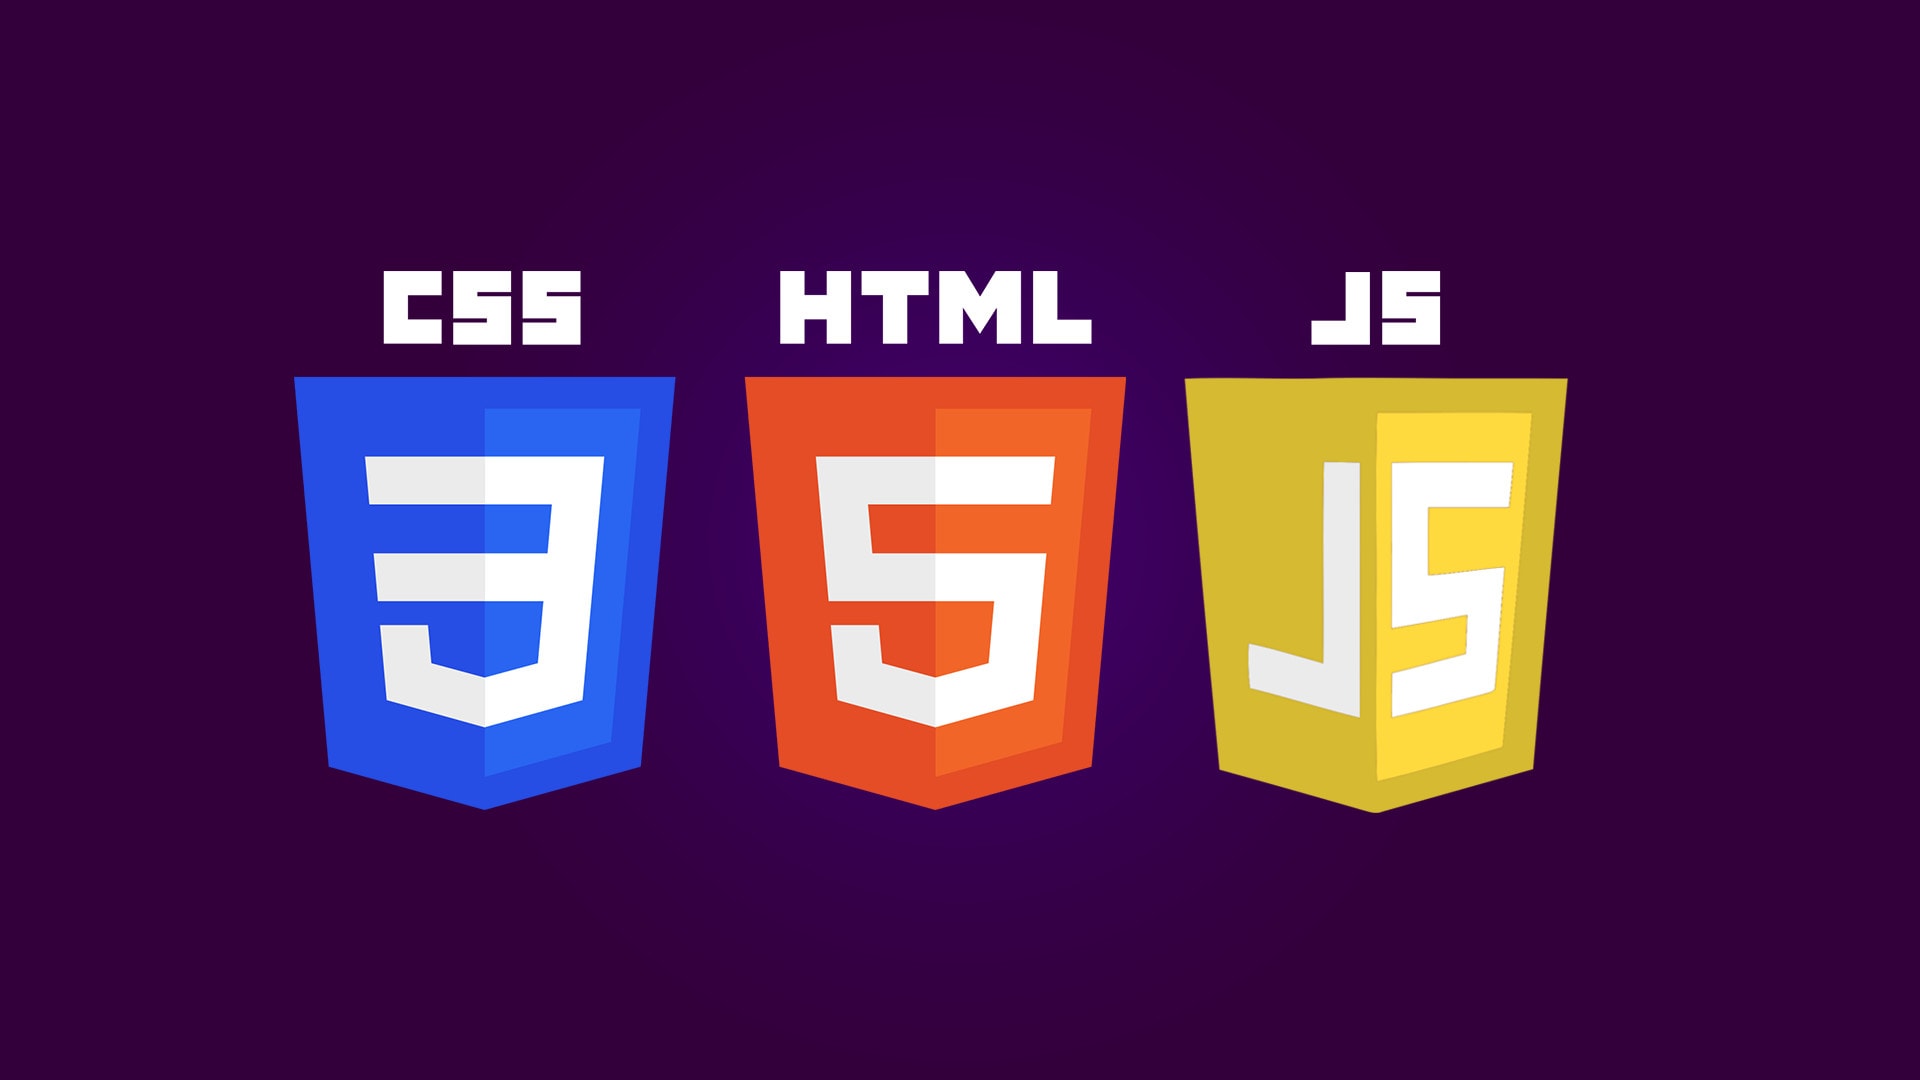 Build your responsive website using html, css, js, and php